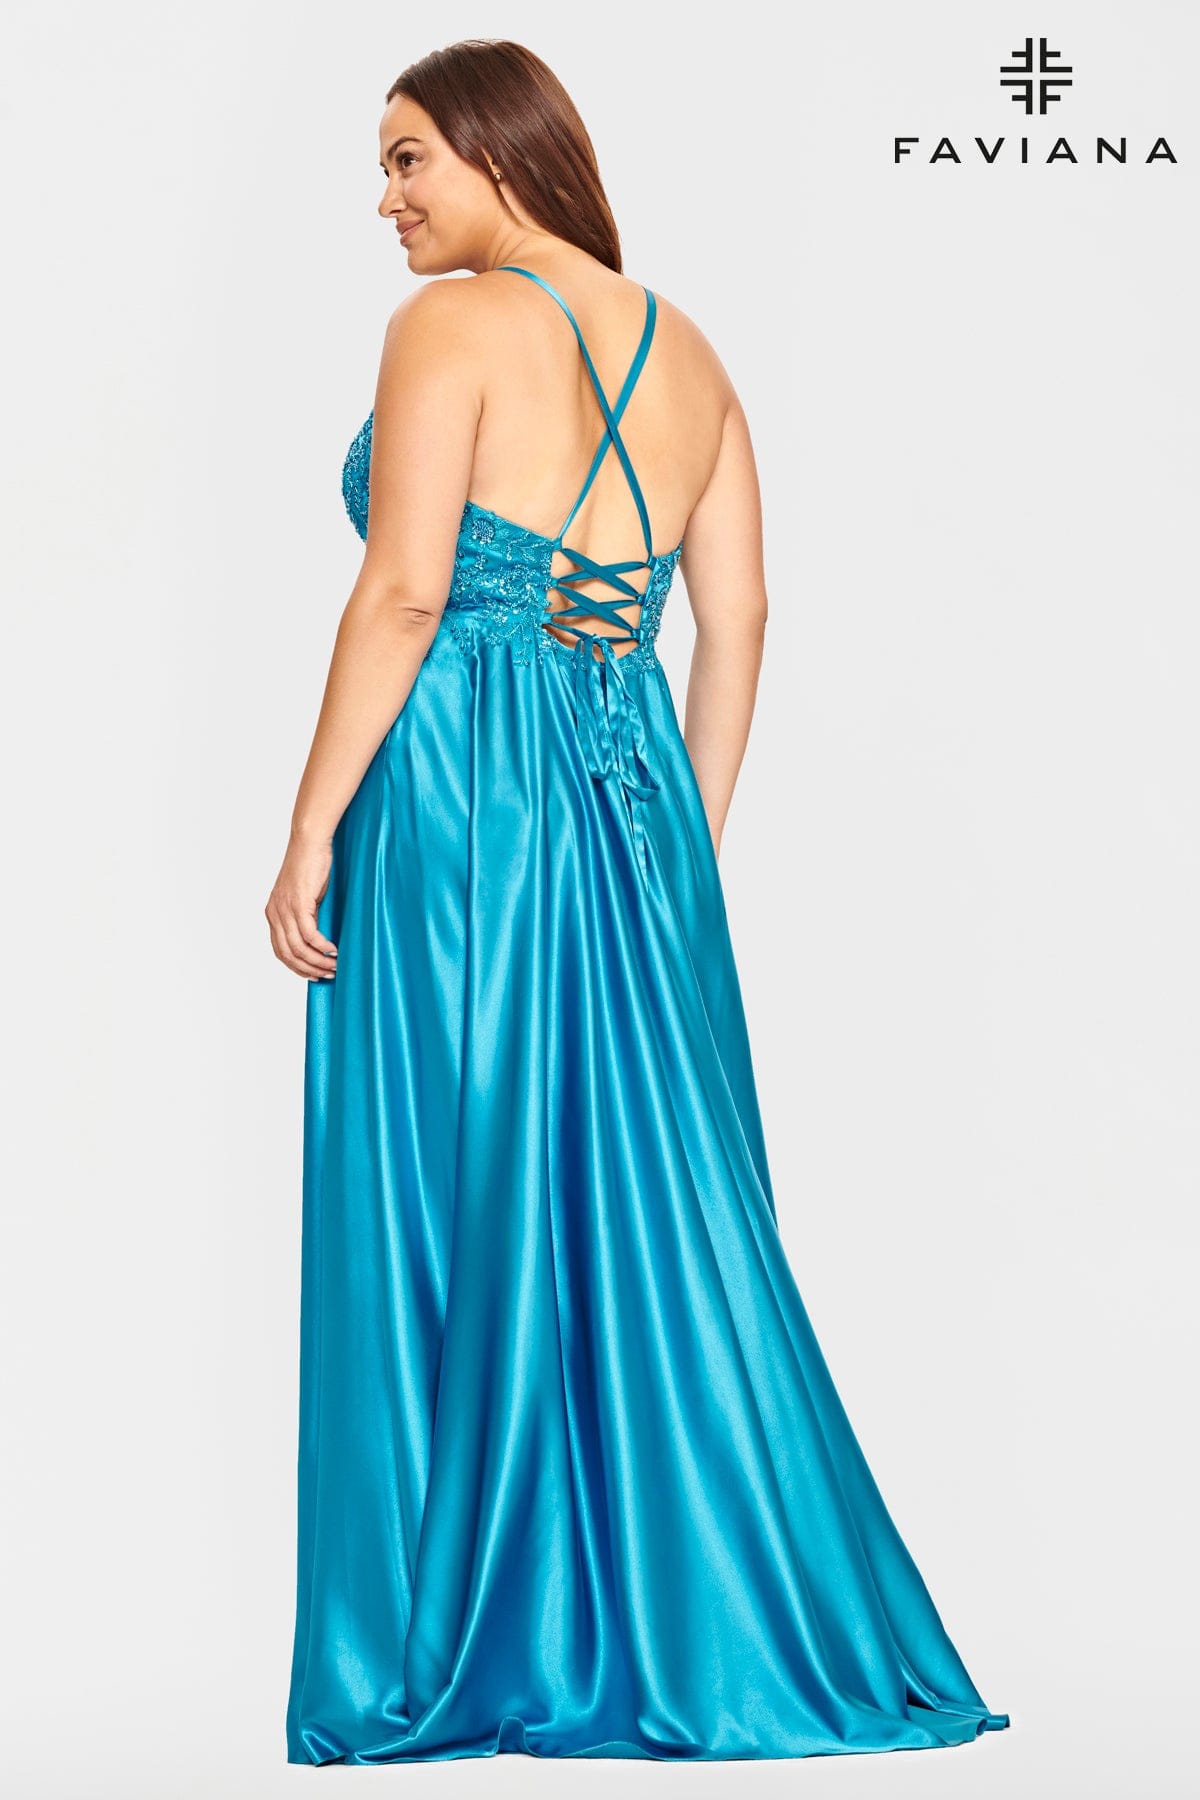 Plus Size V Neck Prom Dress With Flowy Skirt And Beaded Bodice